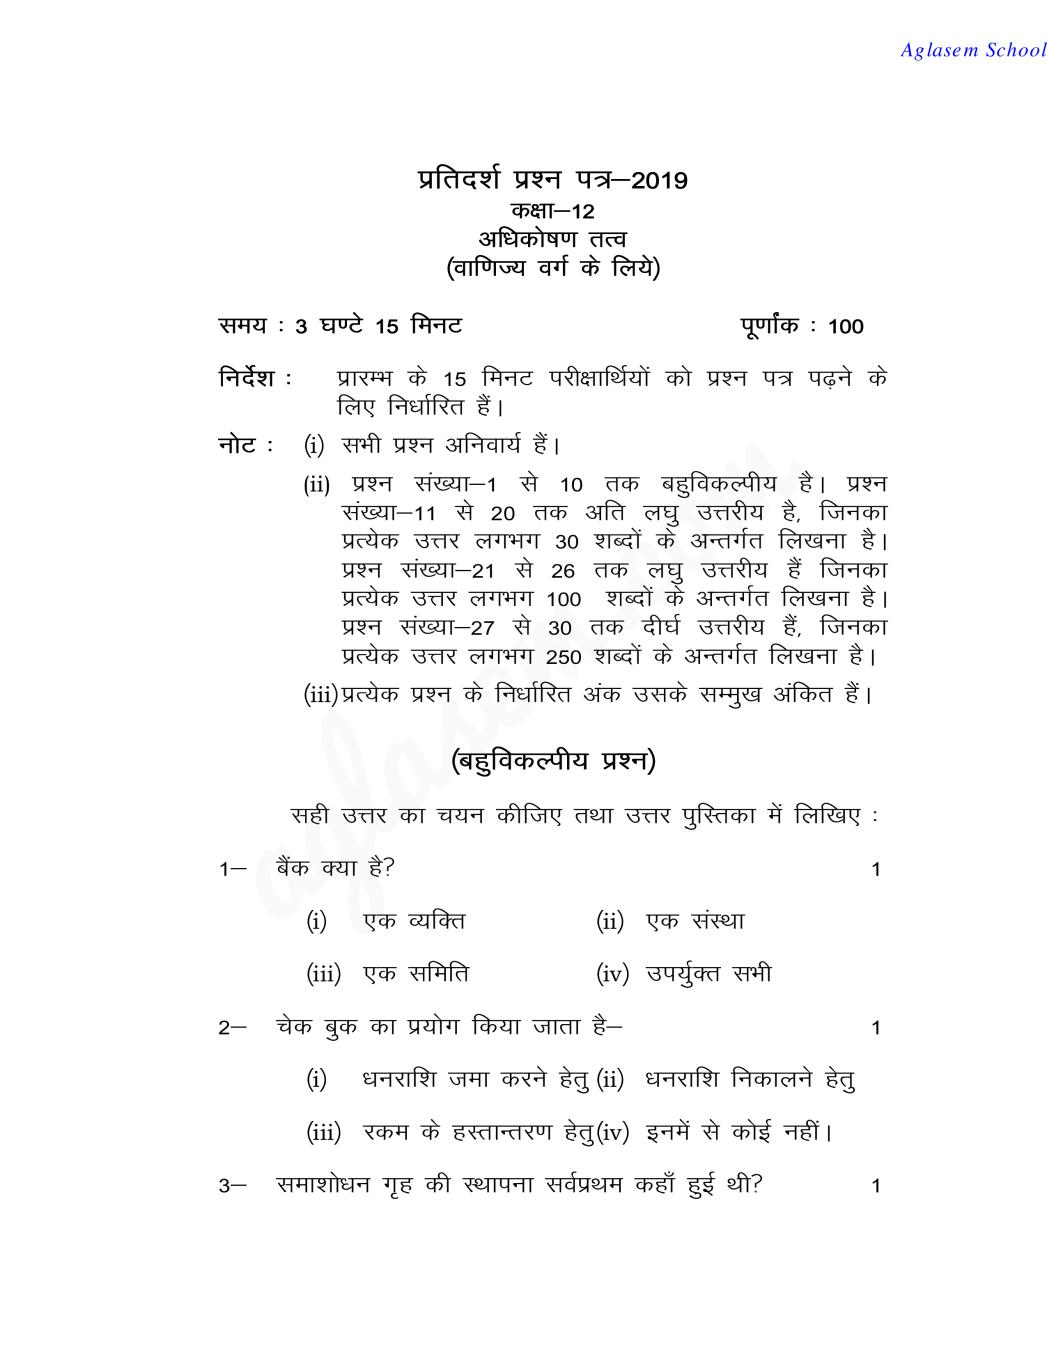 UP Board Class 12 Model Paper 2019 BANKING - Page 1